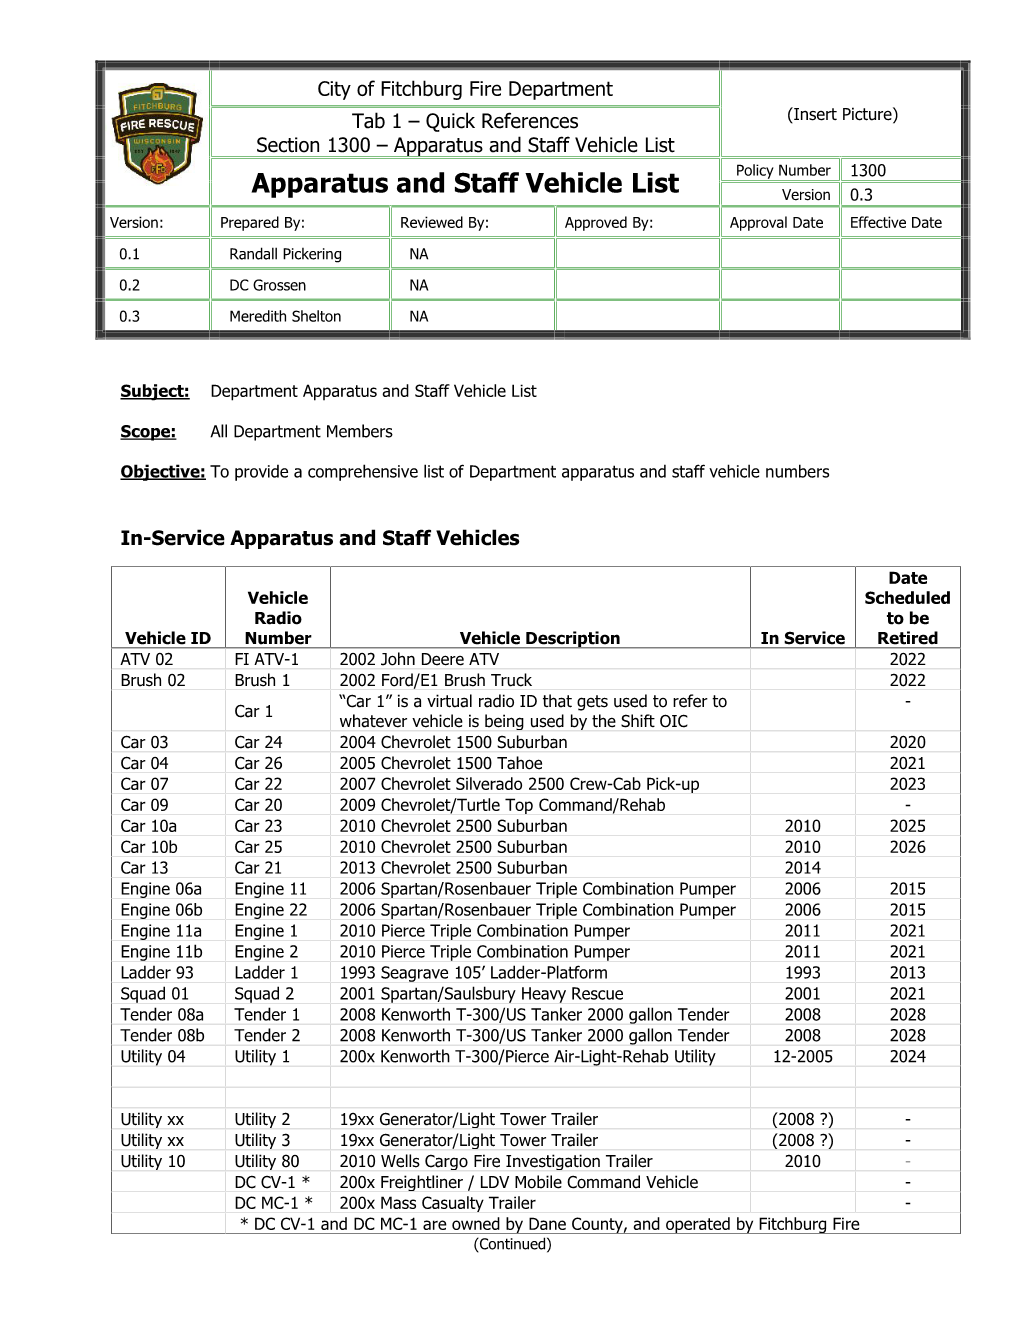 Apparatus and Staff Vehicle List